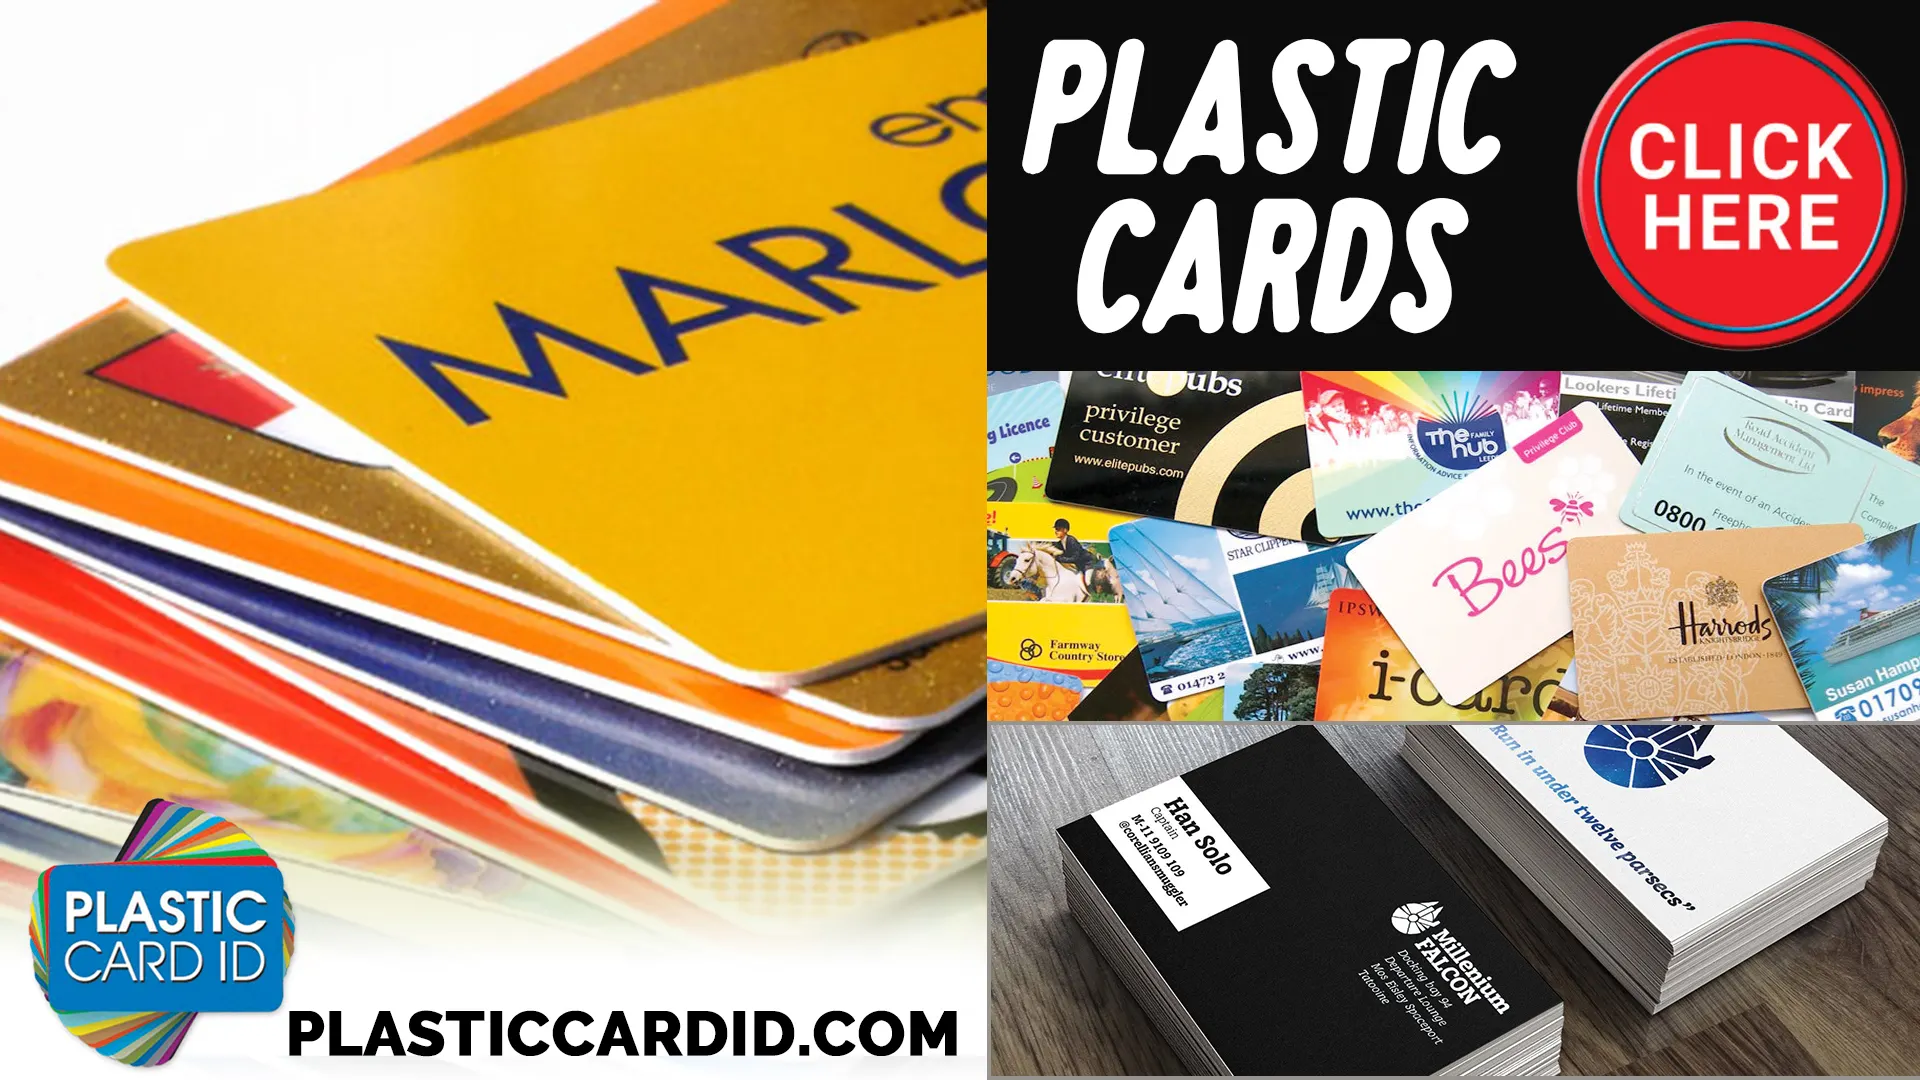 Our Environmental Efforts Go Beyond Card Manufacturing